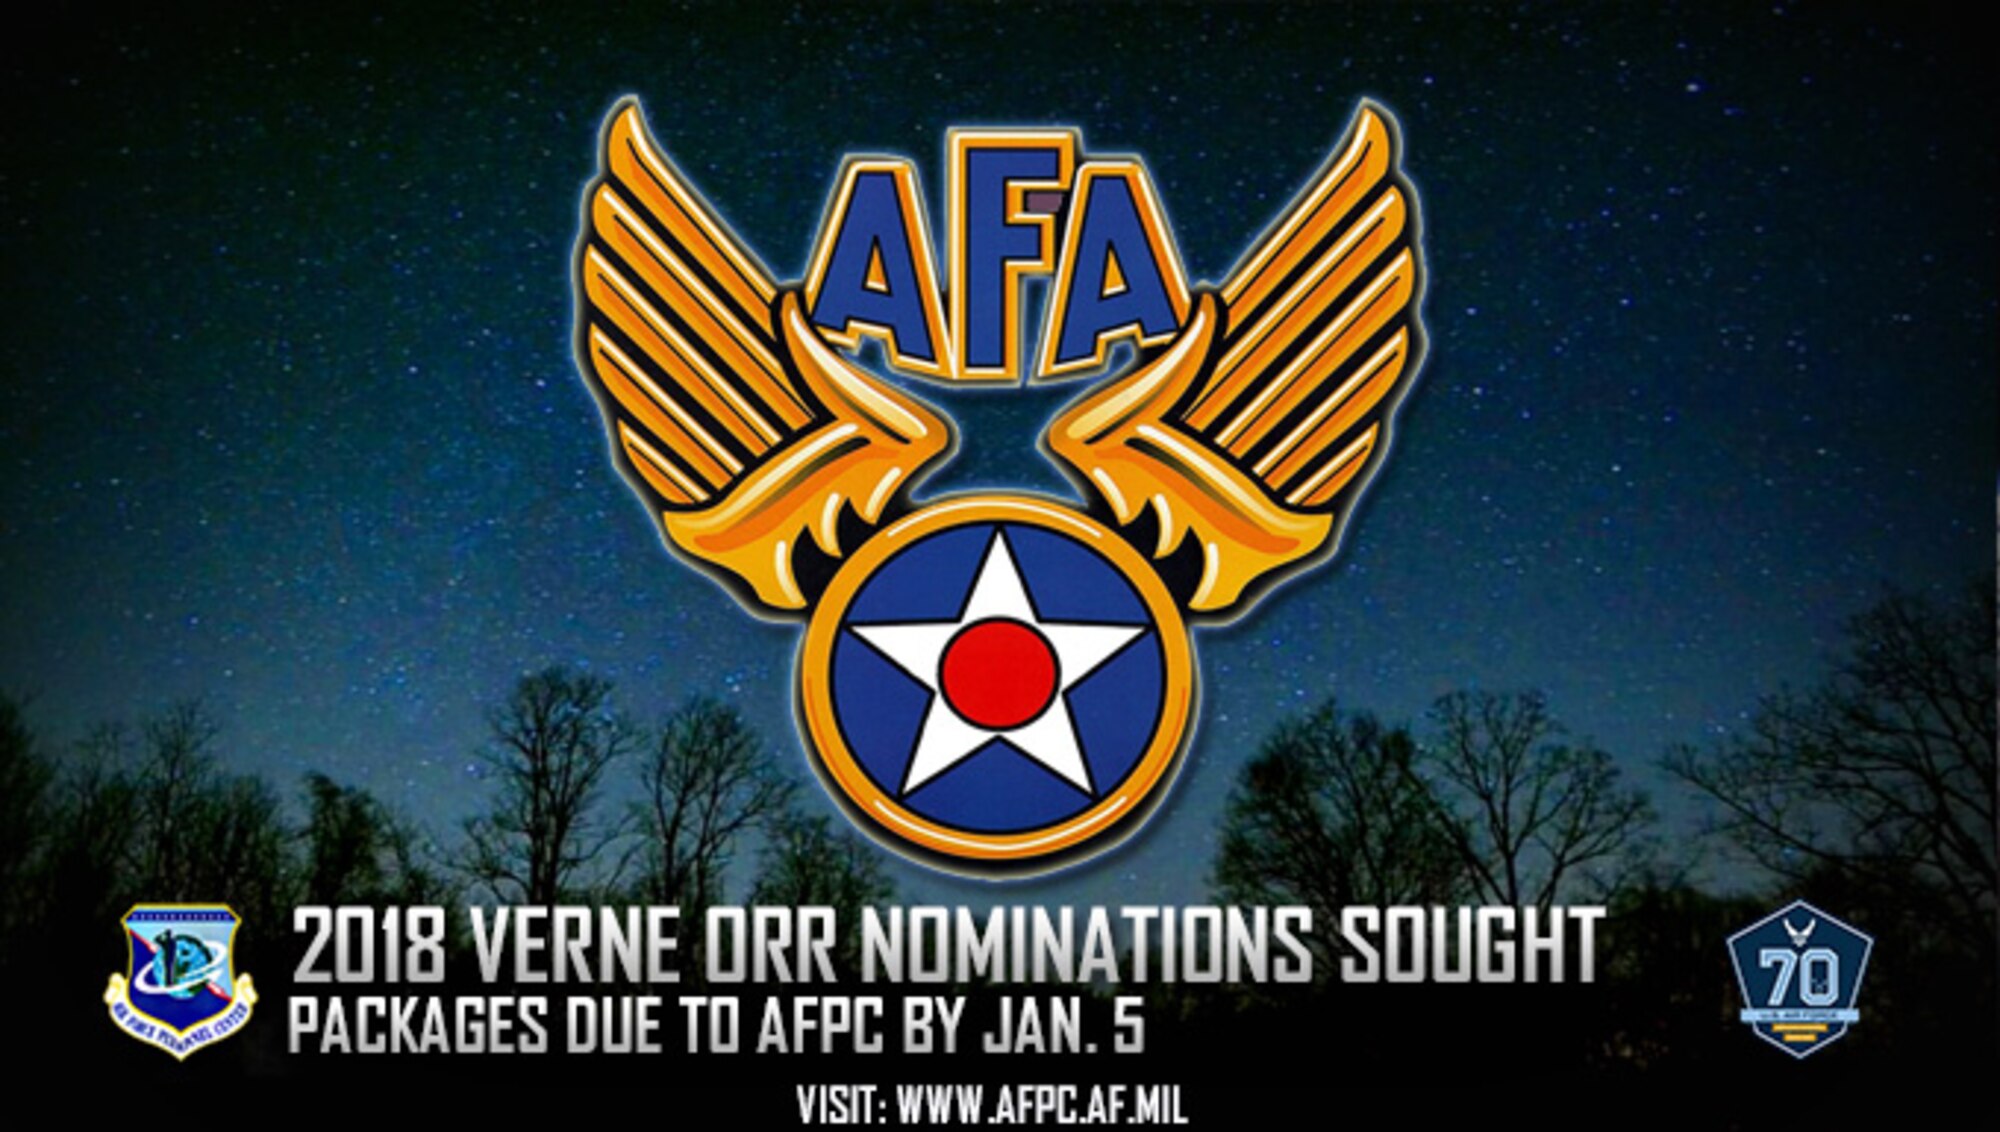 2018 Verne Orr nominations sought; packages due to AFPC by Jan. 5.